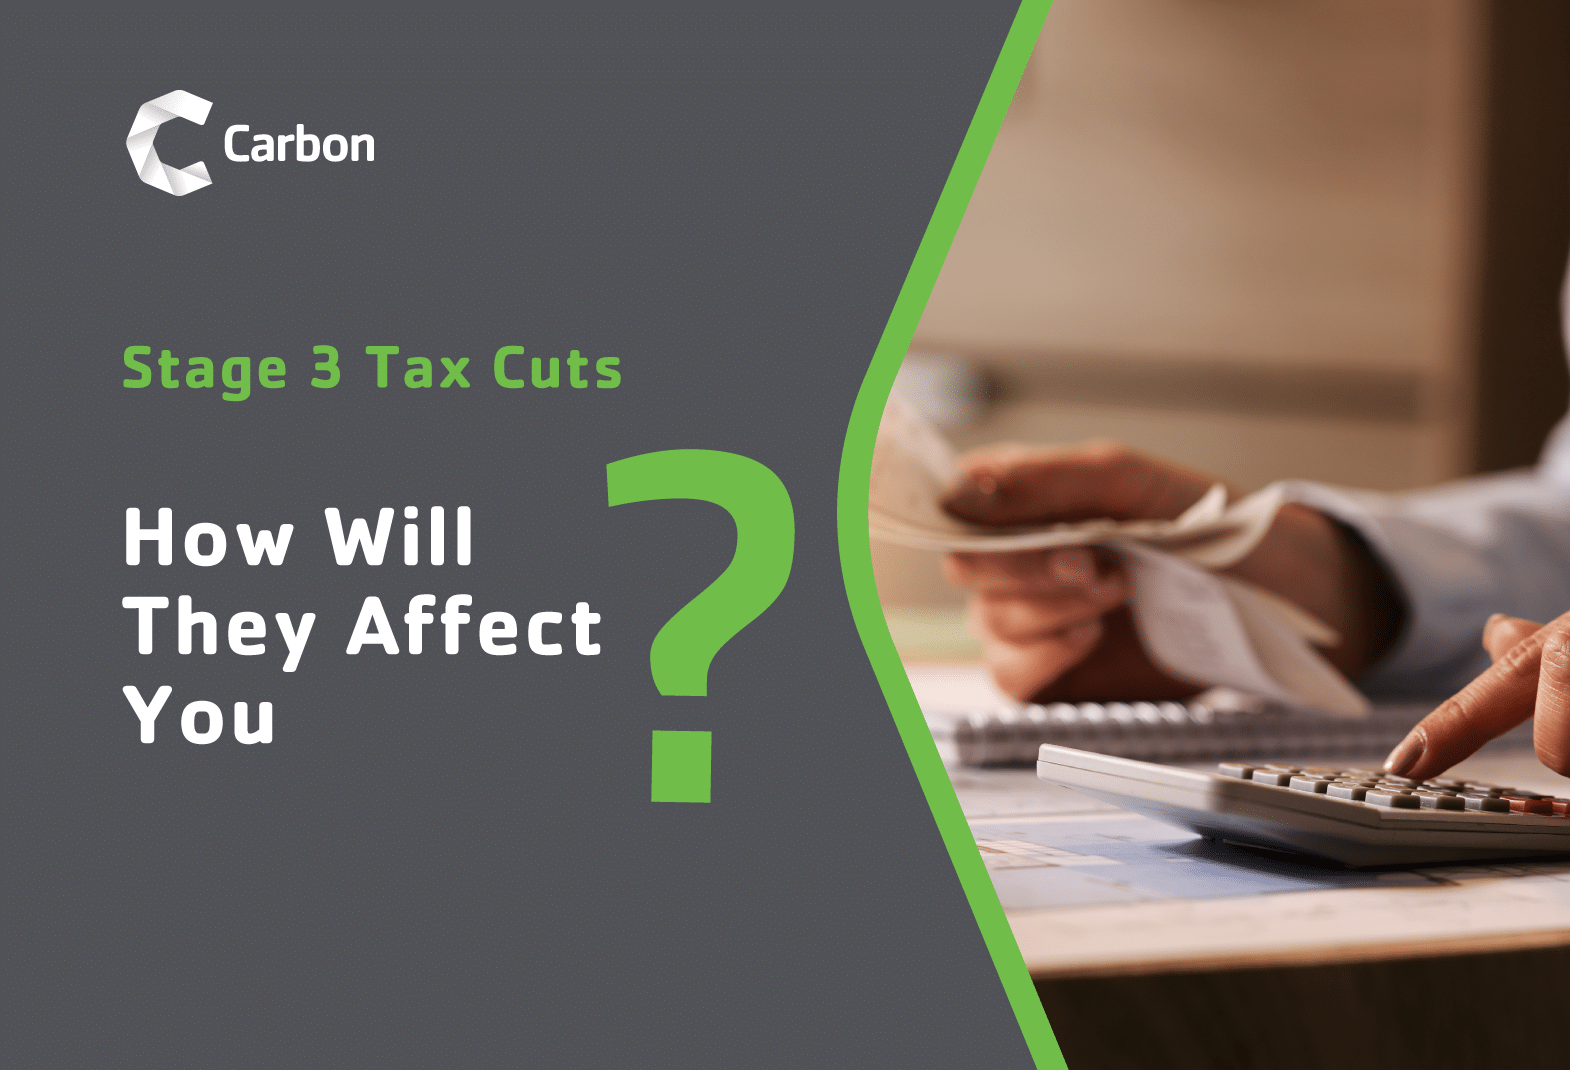 Stage 3 Tax Cuts – How Will They Affect You?